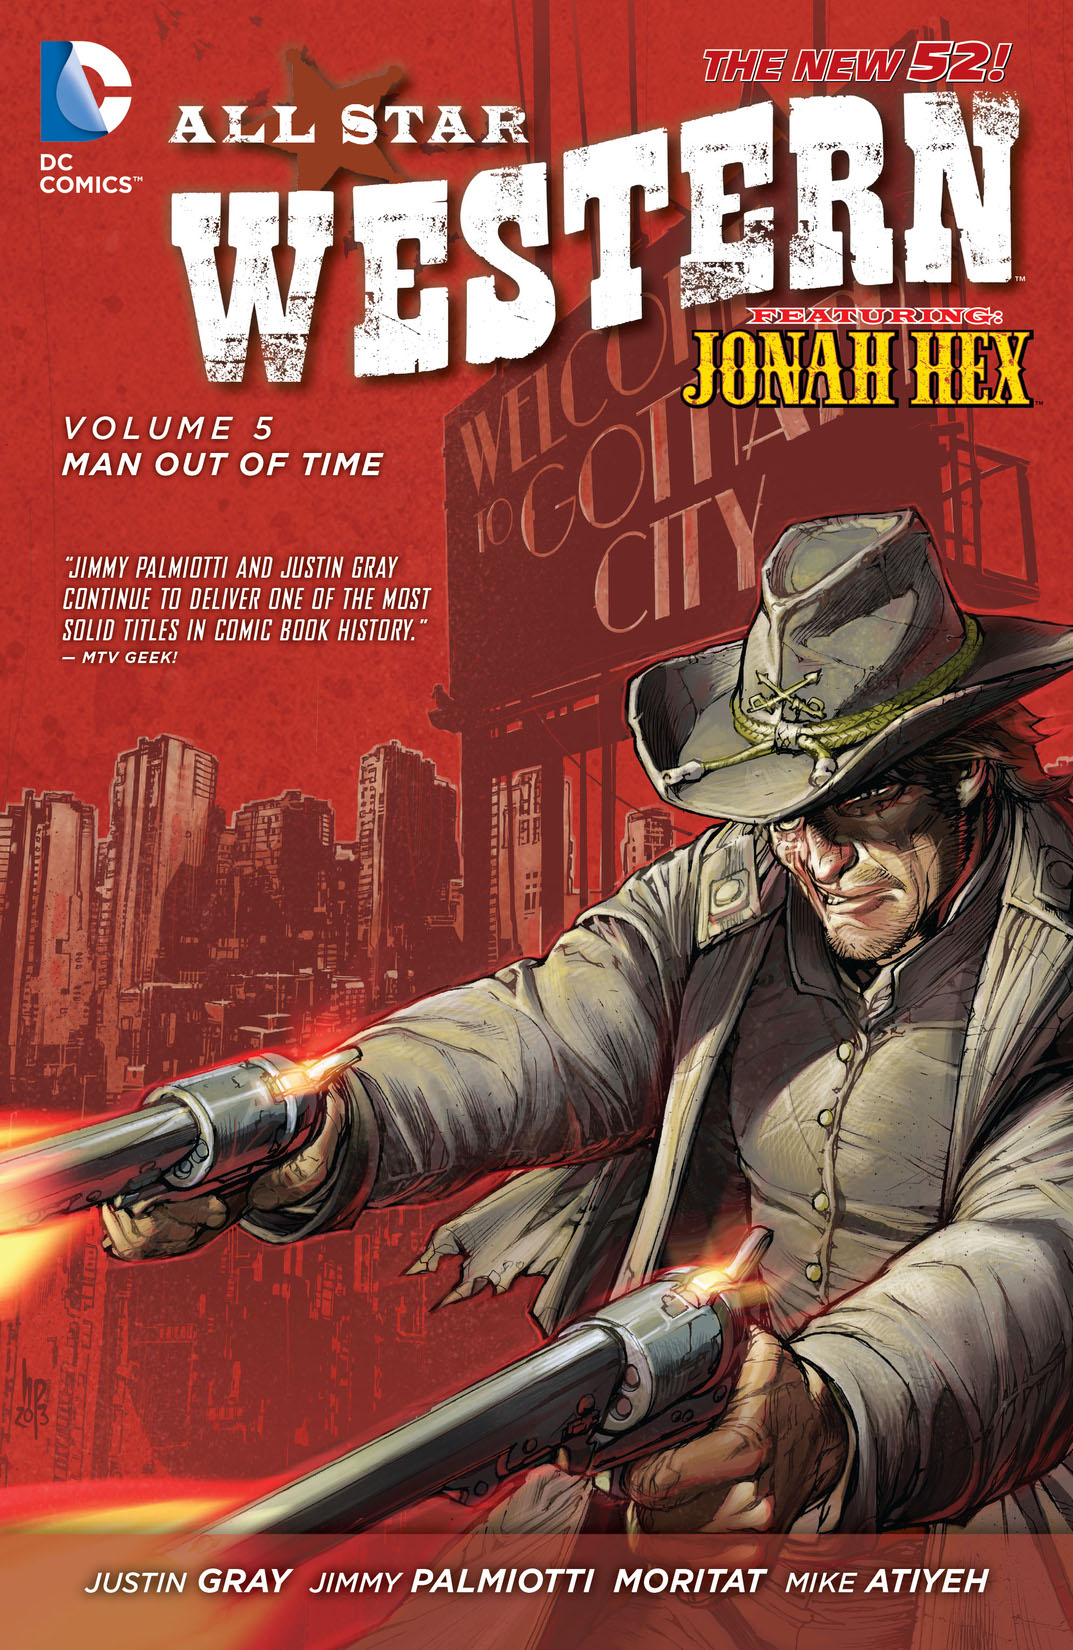 All Star Western Vol. 5: Man Out of Time preview images